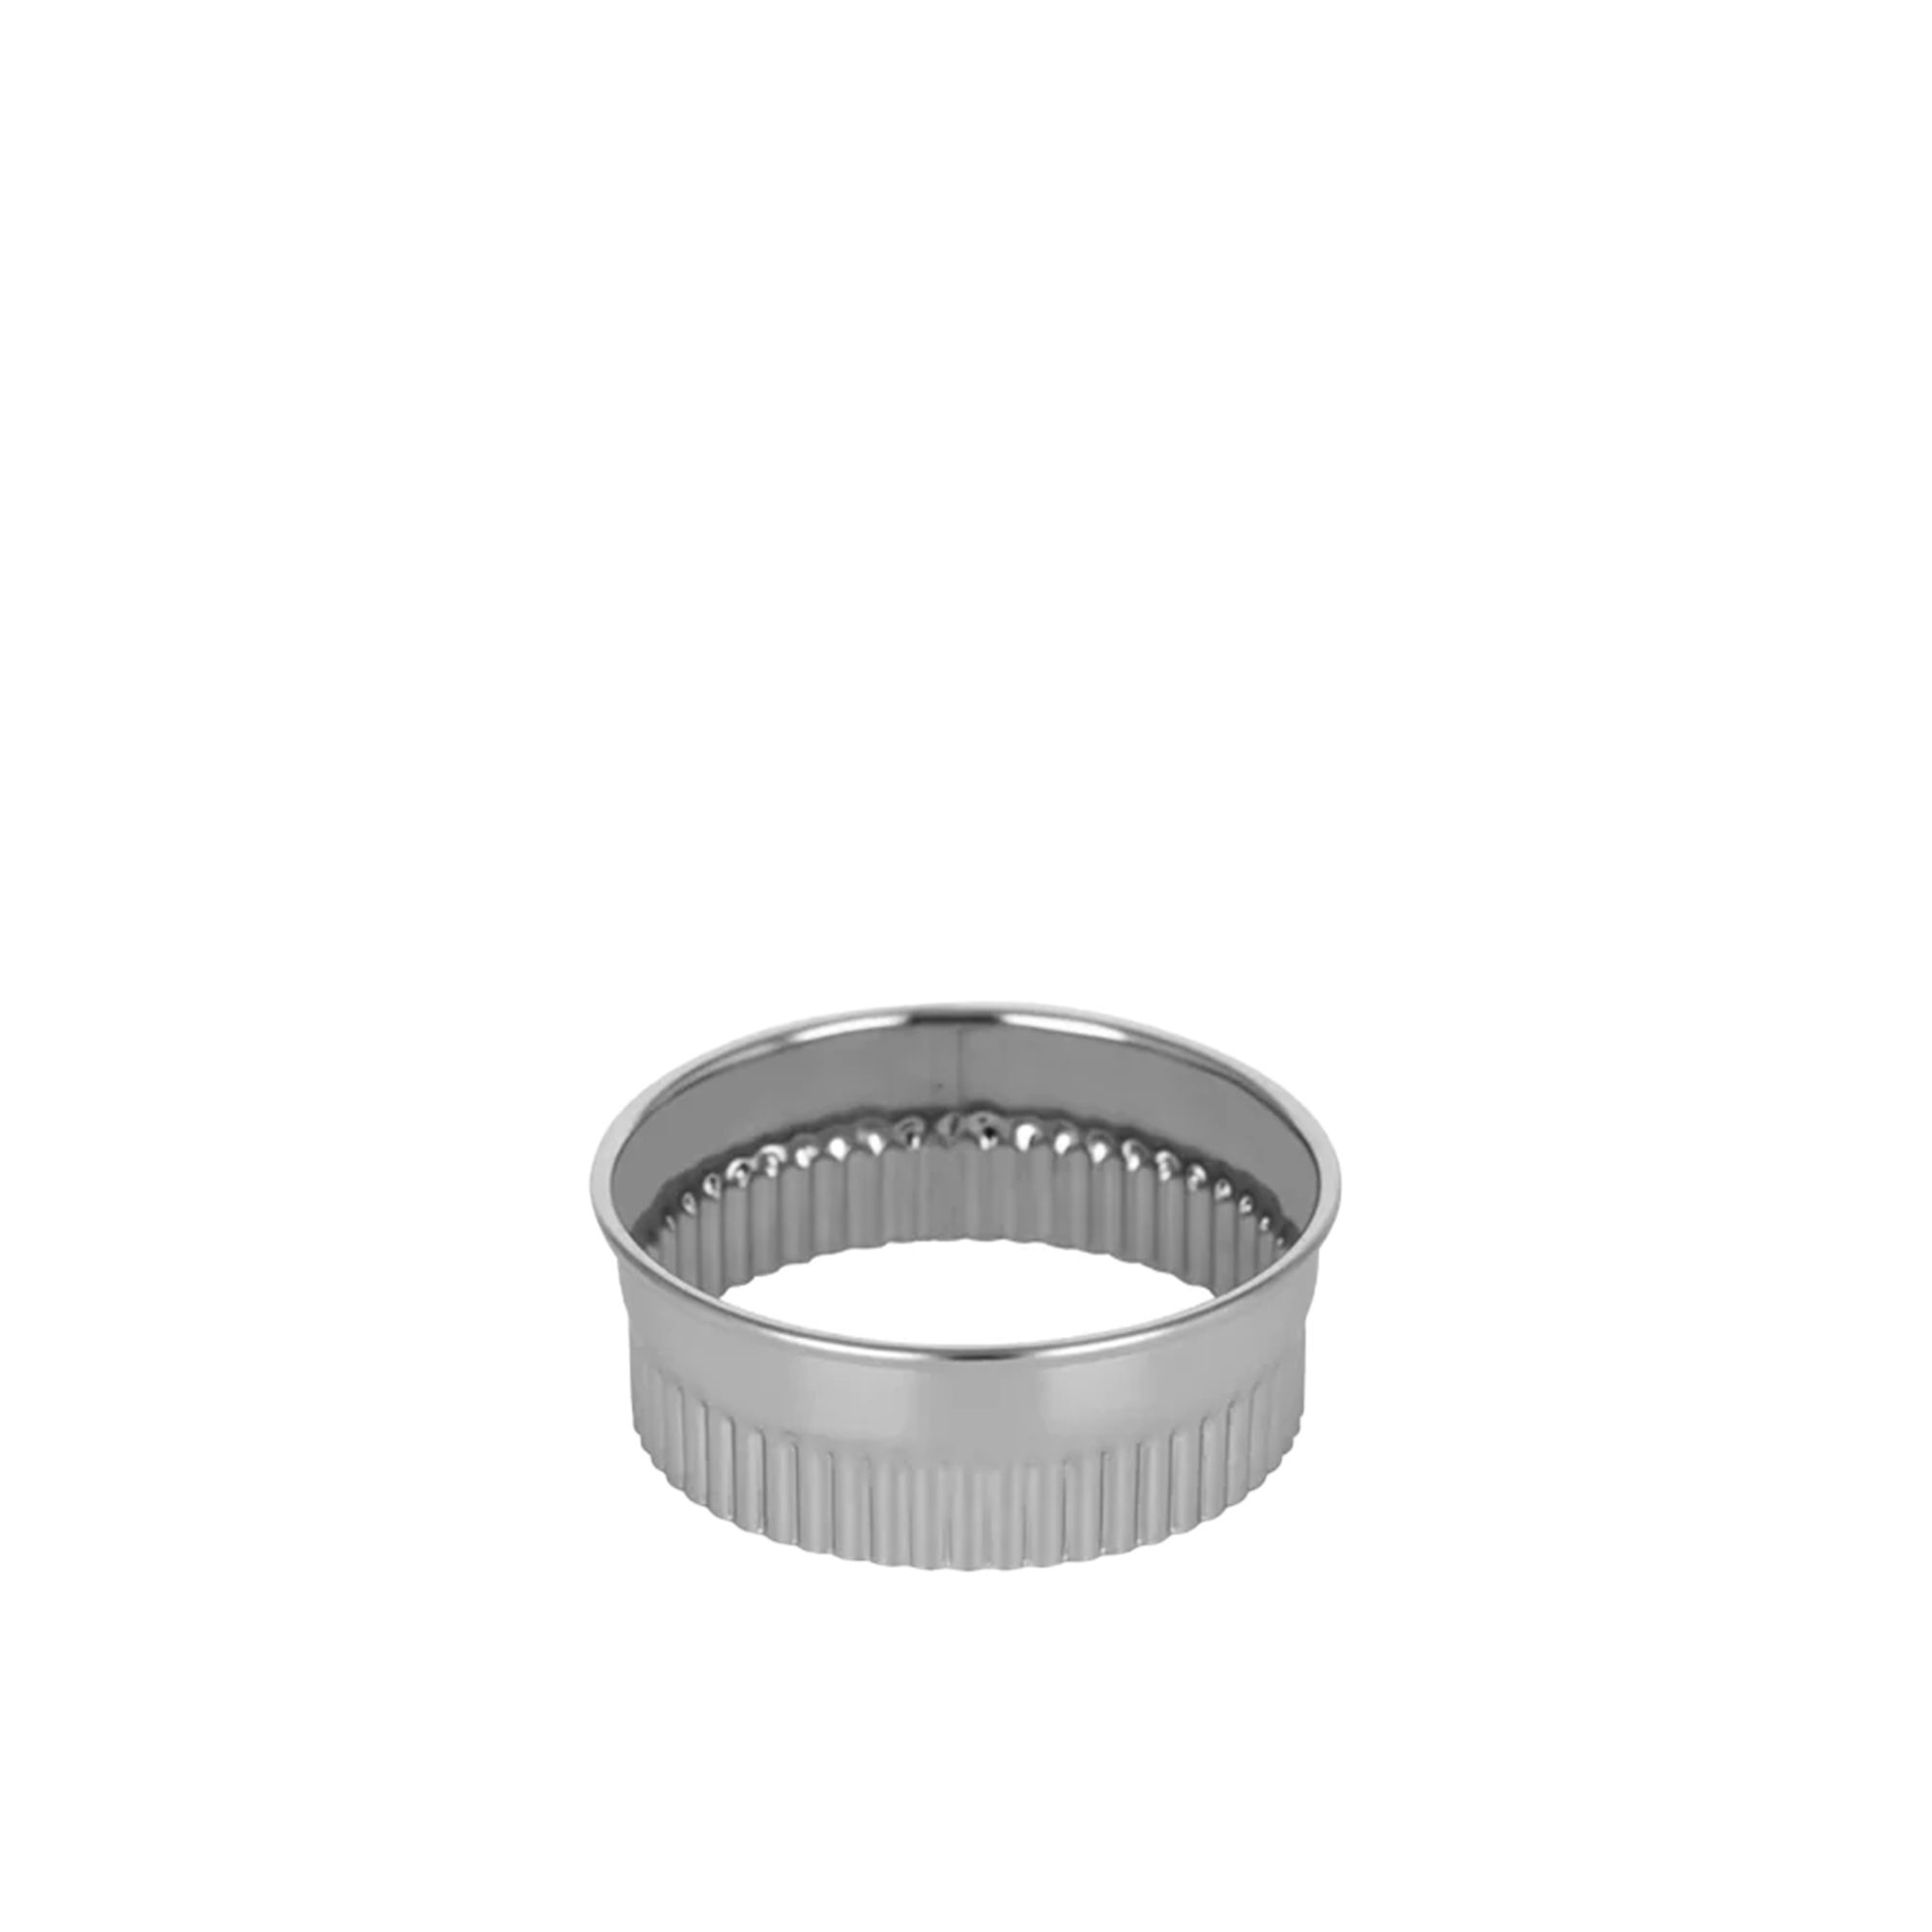 Chef Inox Cutter Crinkled 90mm Image 1